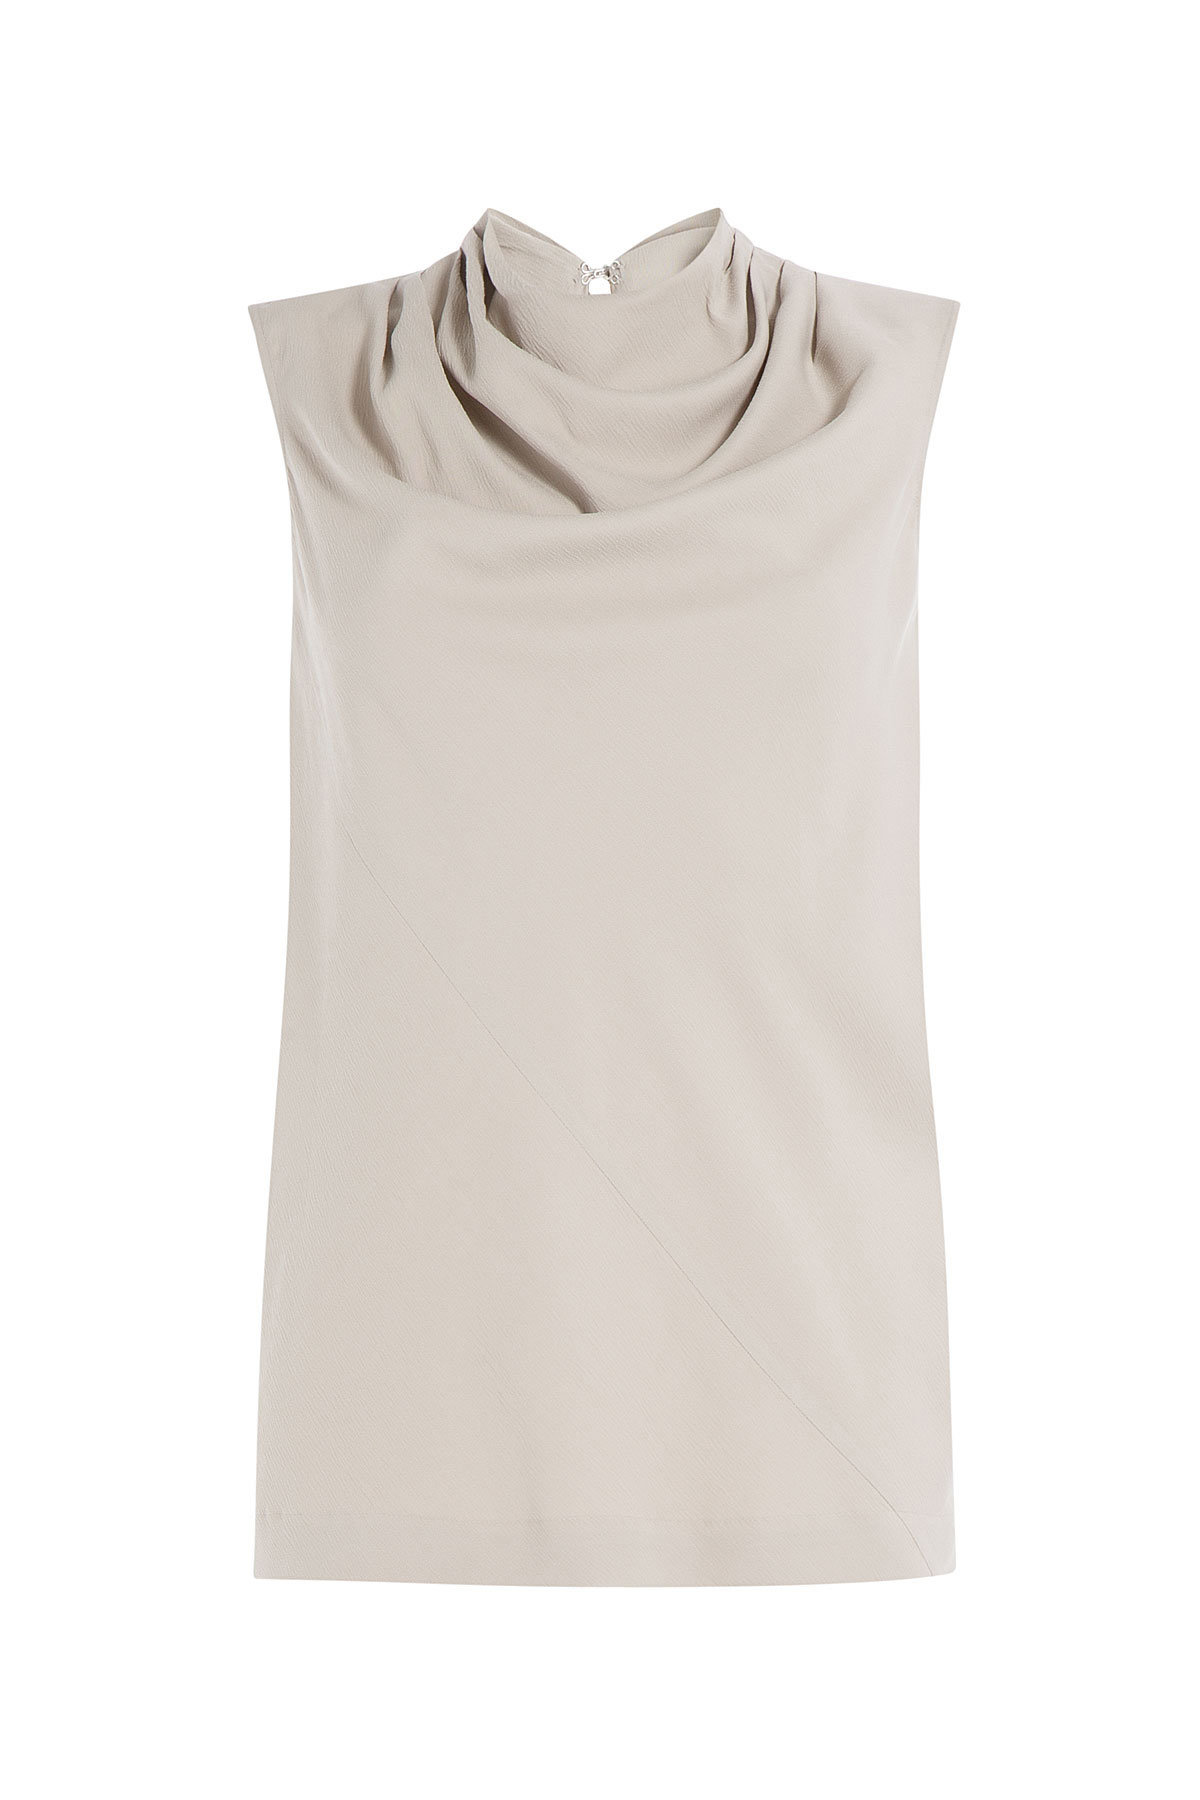 Draped Crepe Top by Rick Owens